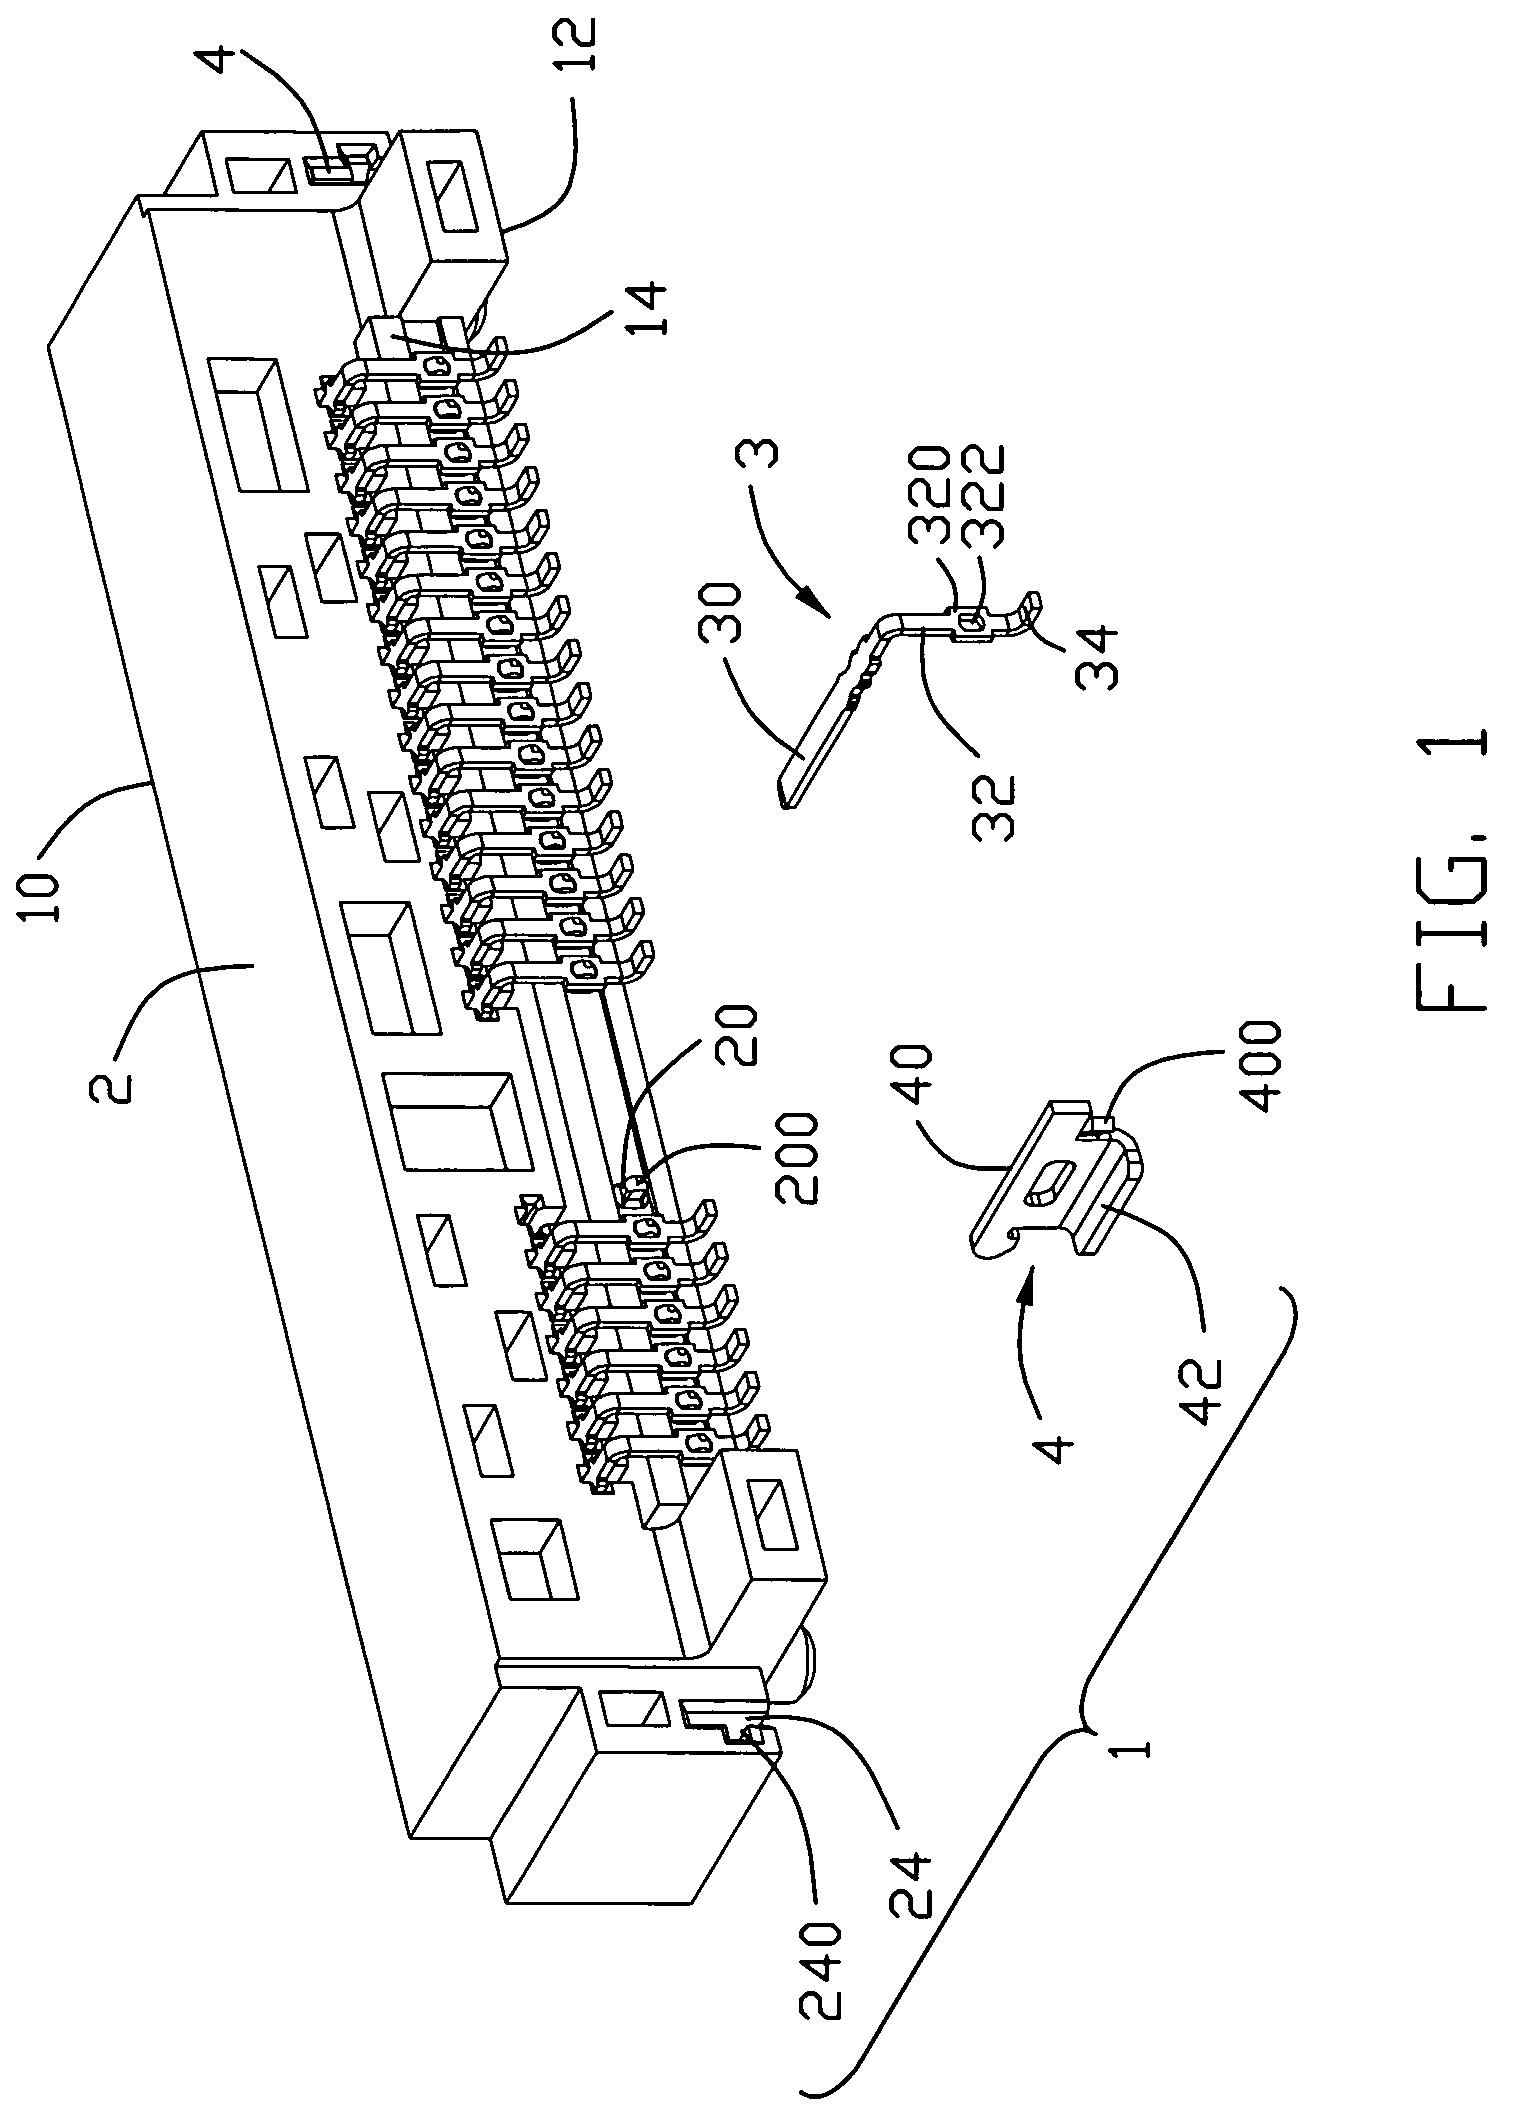 Electrical connector having matched impedance by contacts having node arrangement